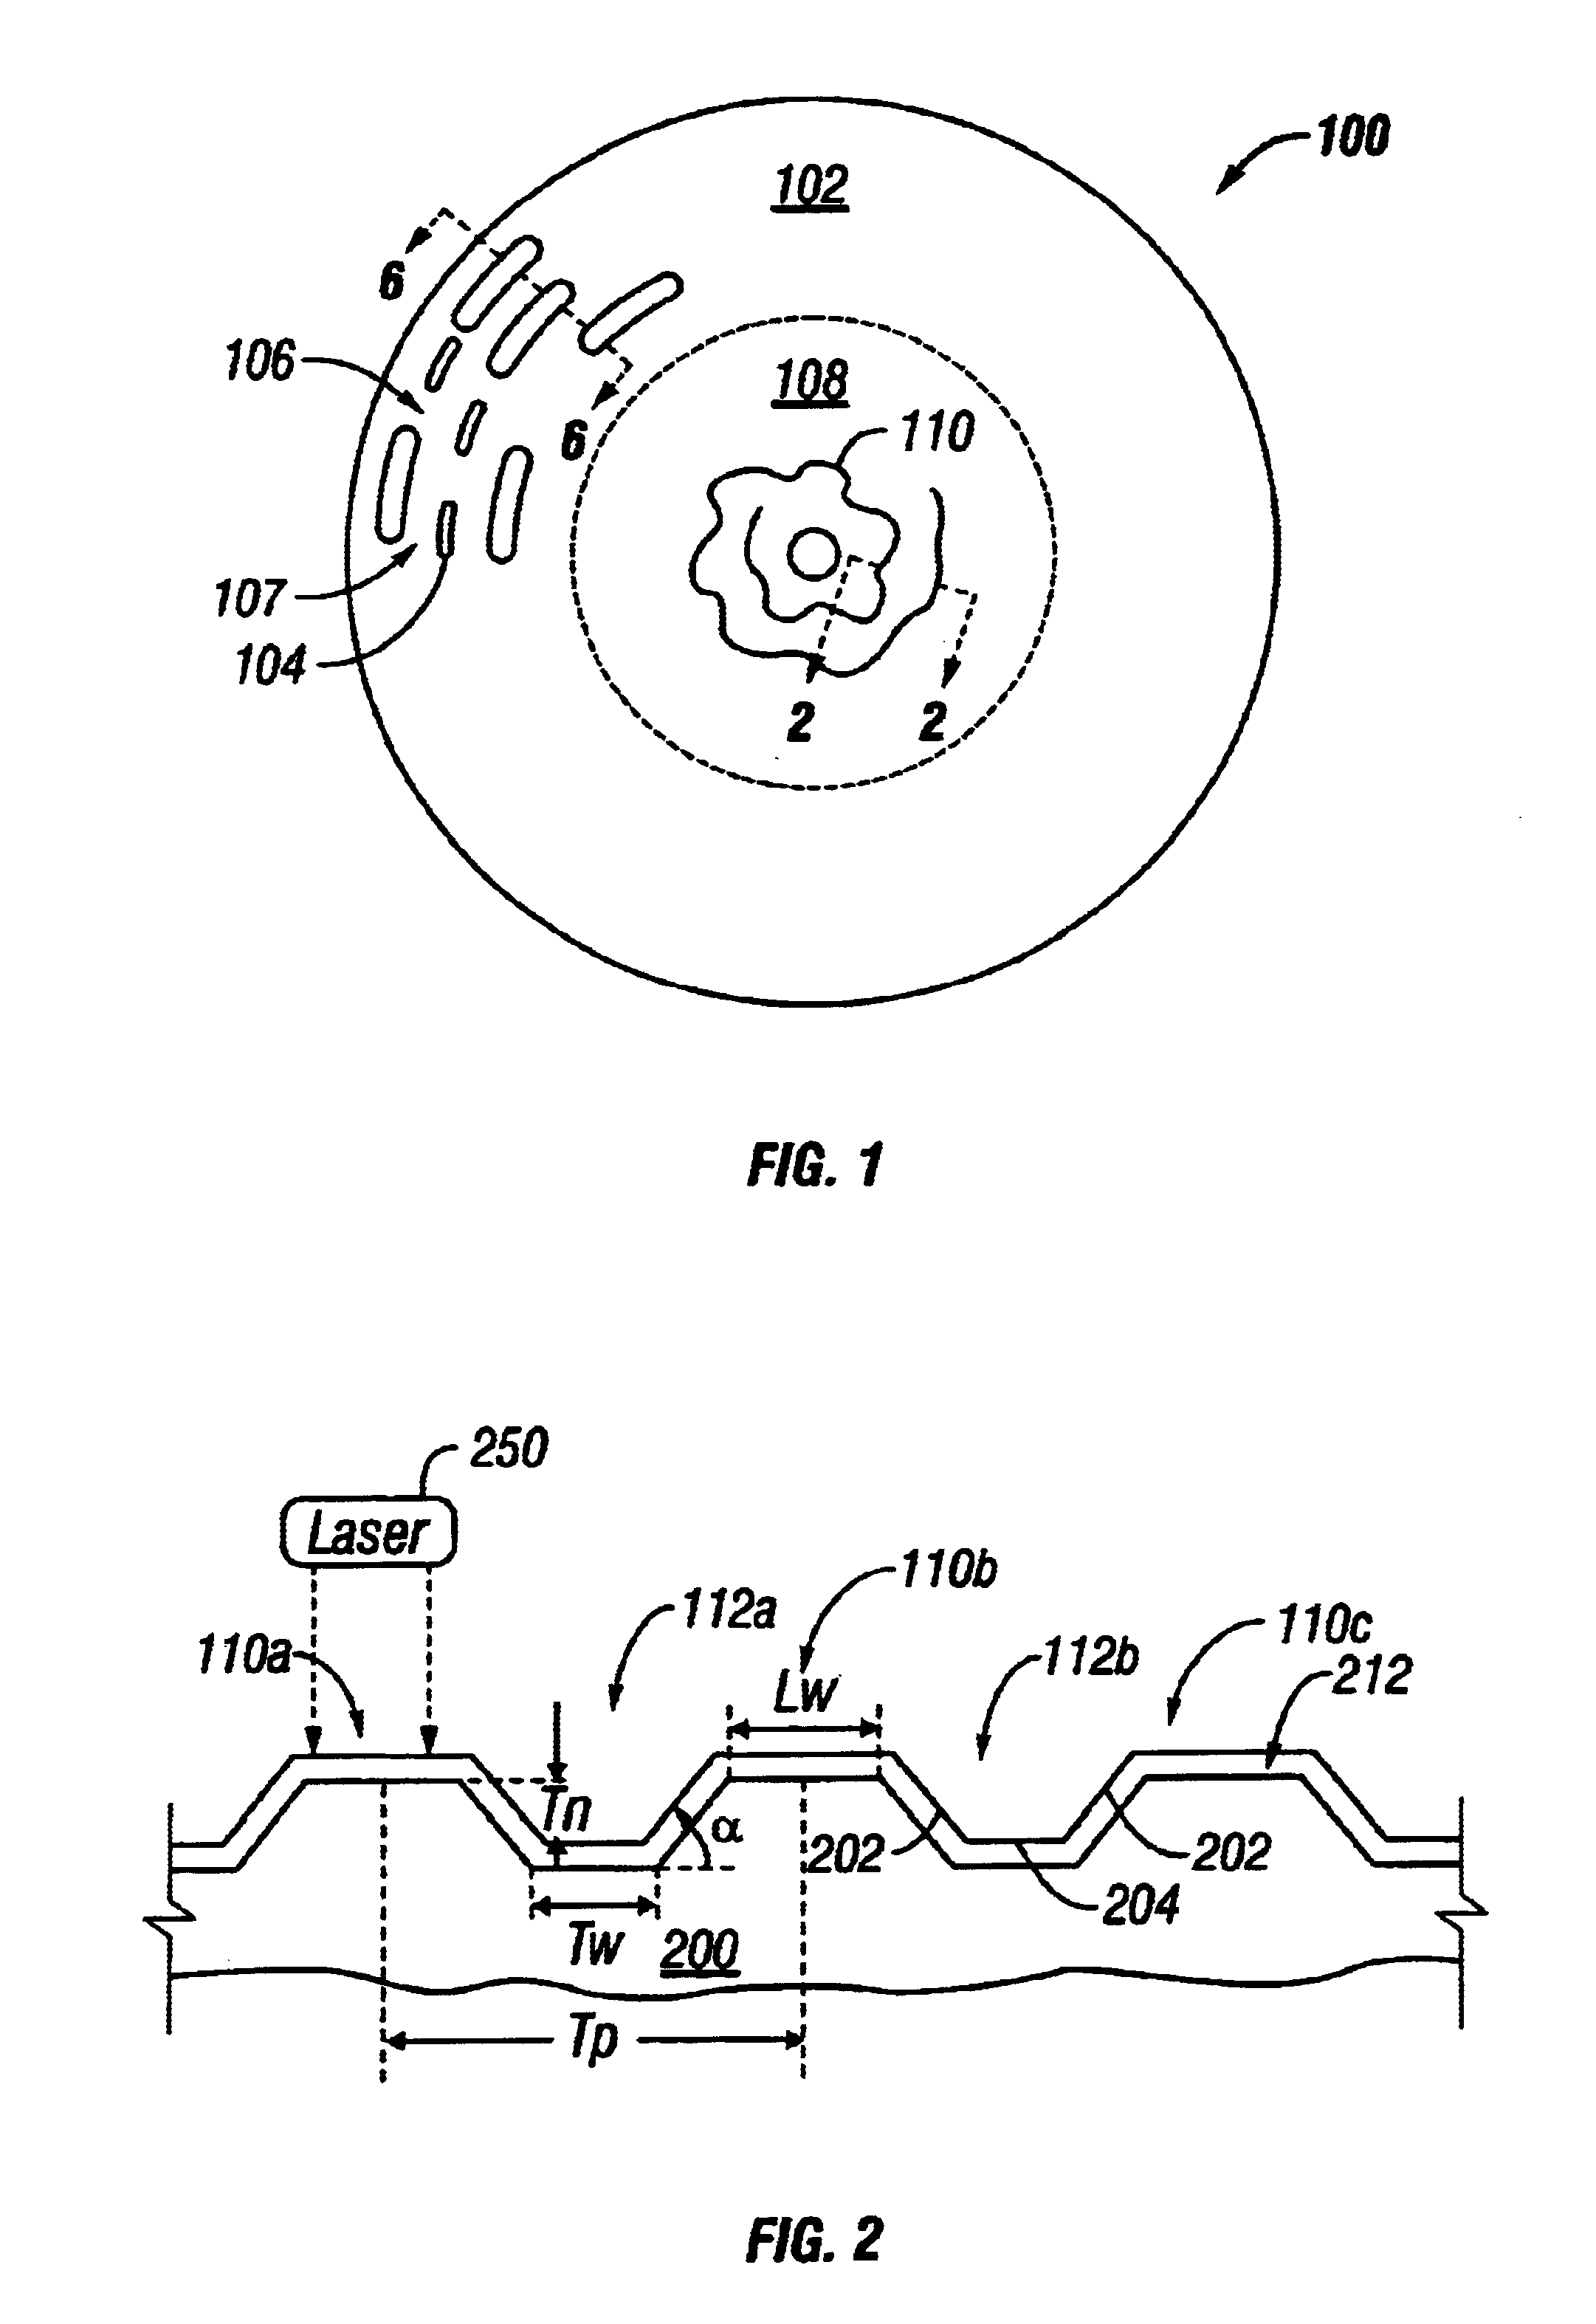 Double-sided hybrid optical disk with surface topology